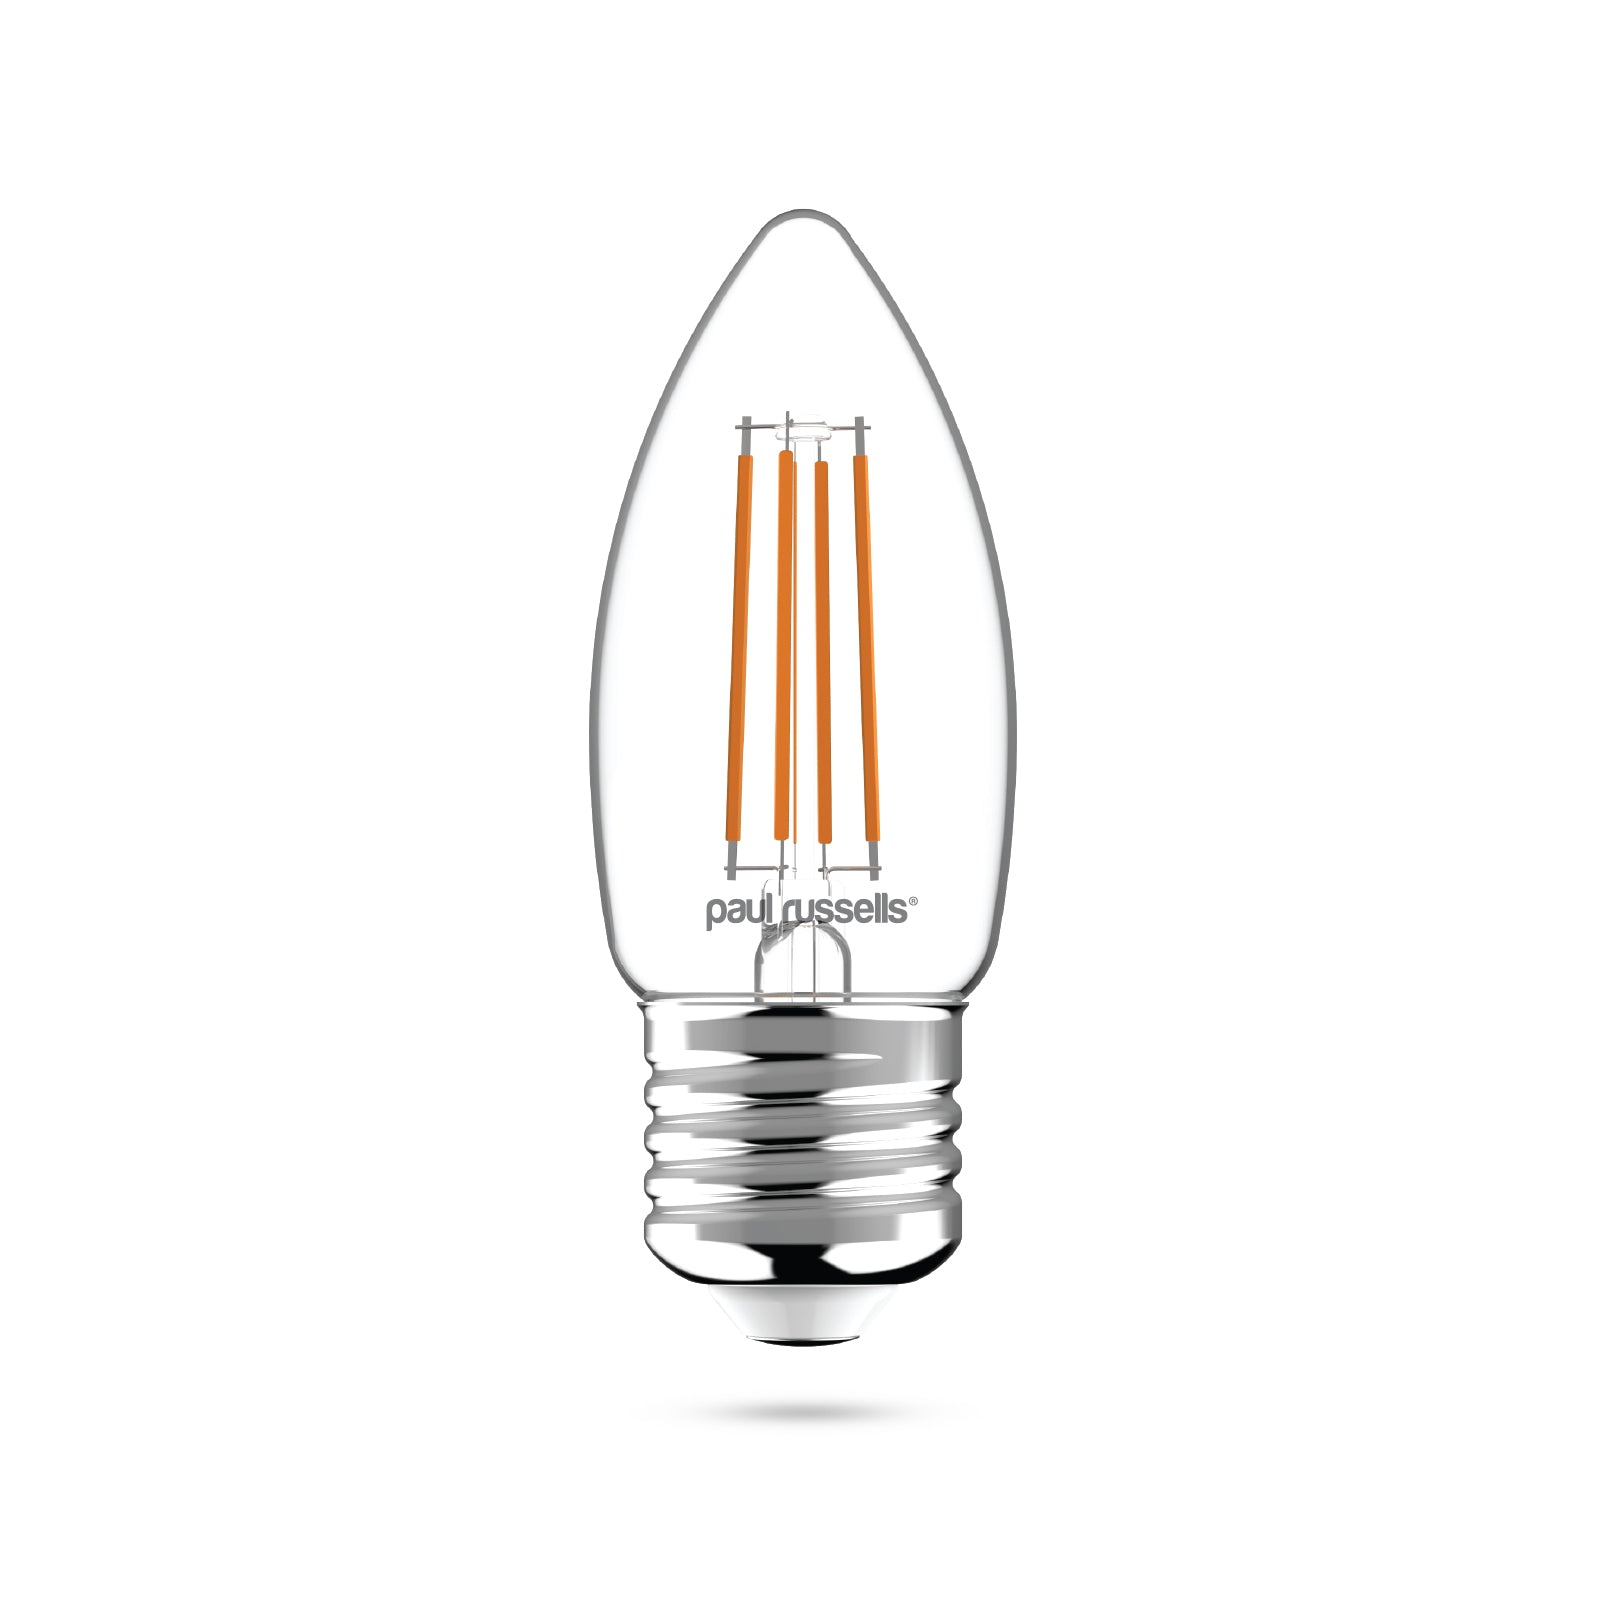 LED Dimmable Filament Candle 4.5W (40w), ES/E27, 423 Lumens, Warm White(2700K), 240V